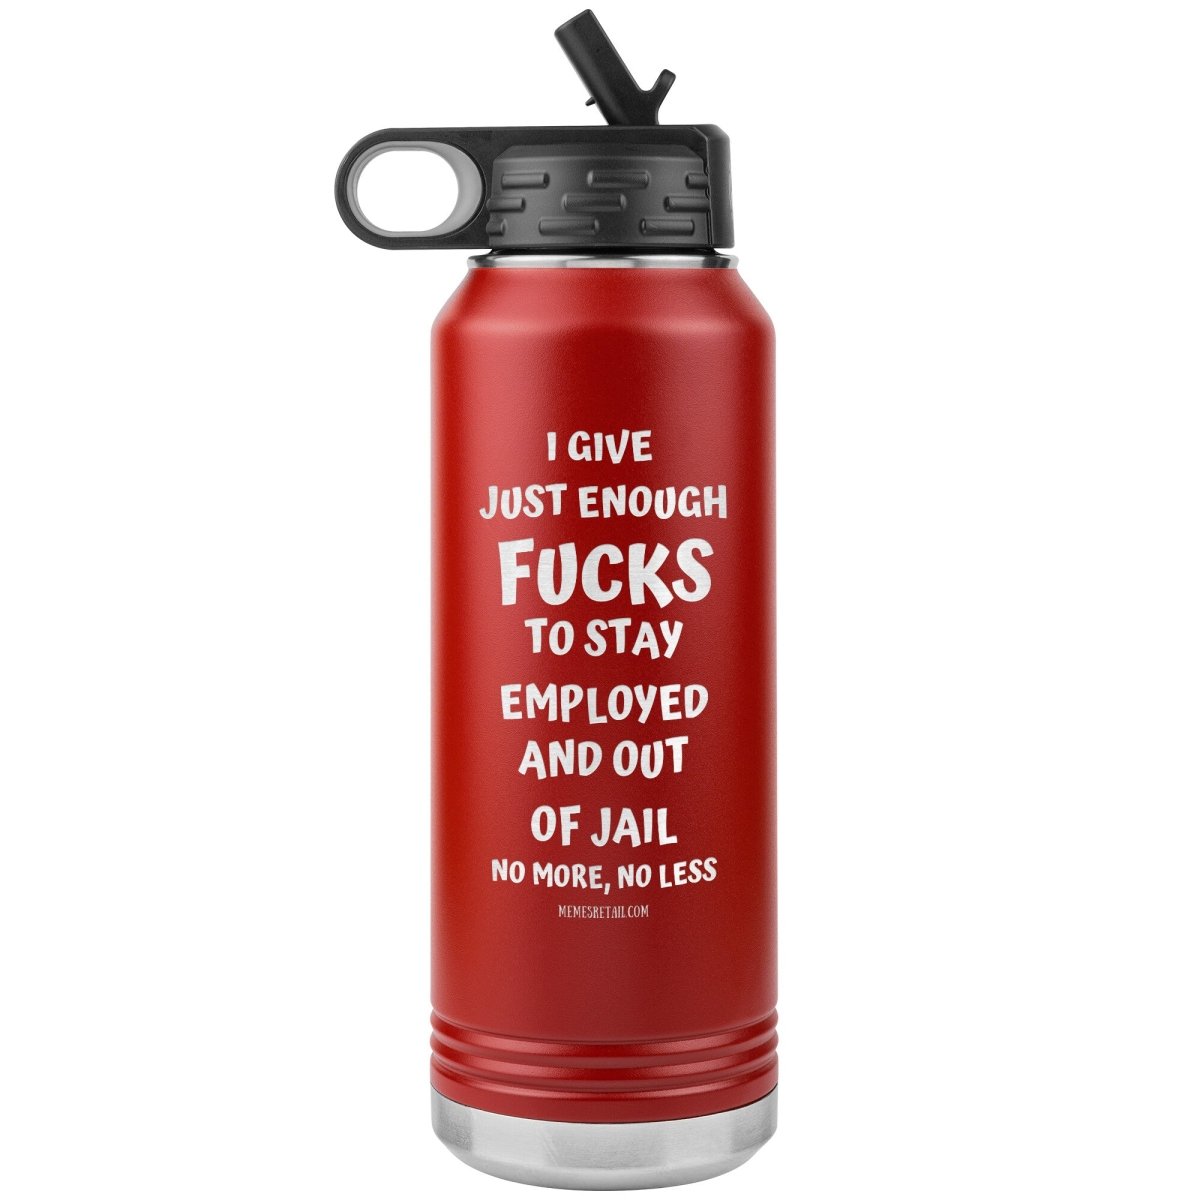 I Give Just Enough Fucks To Stay Employed And Out Of Jail, No More, No Less 32 Oz Water Bottle Tumbler, Red - MemesRetail.com